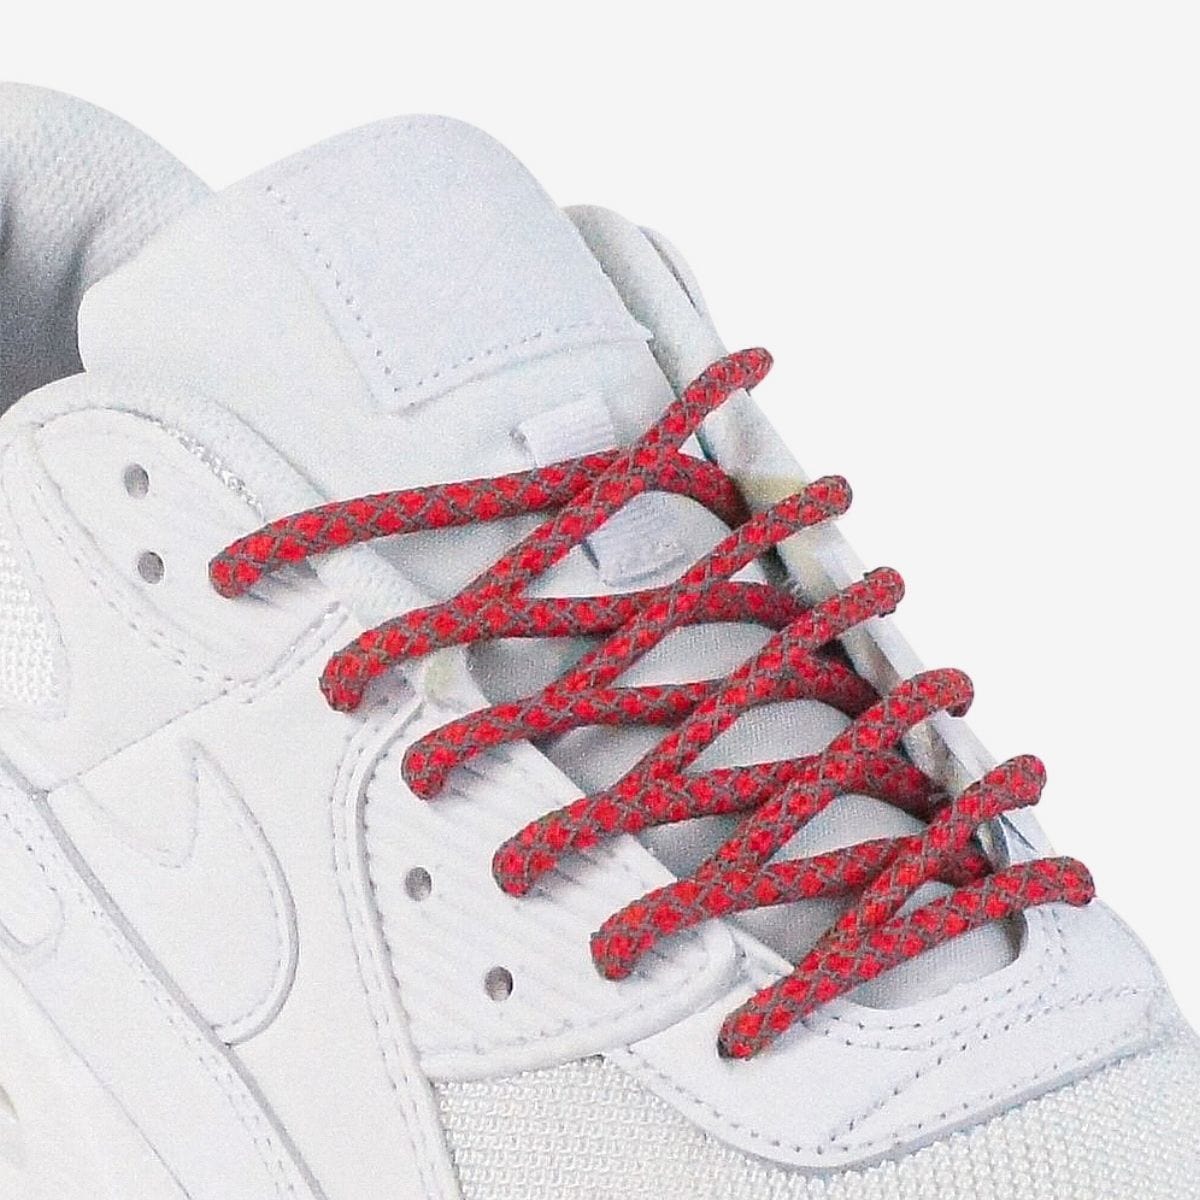 custom-color-shoelaces-on-white-sneakers-with-reflective-red-laces